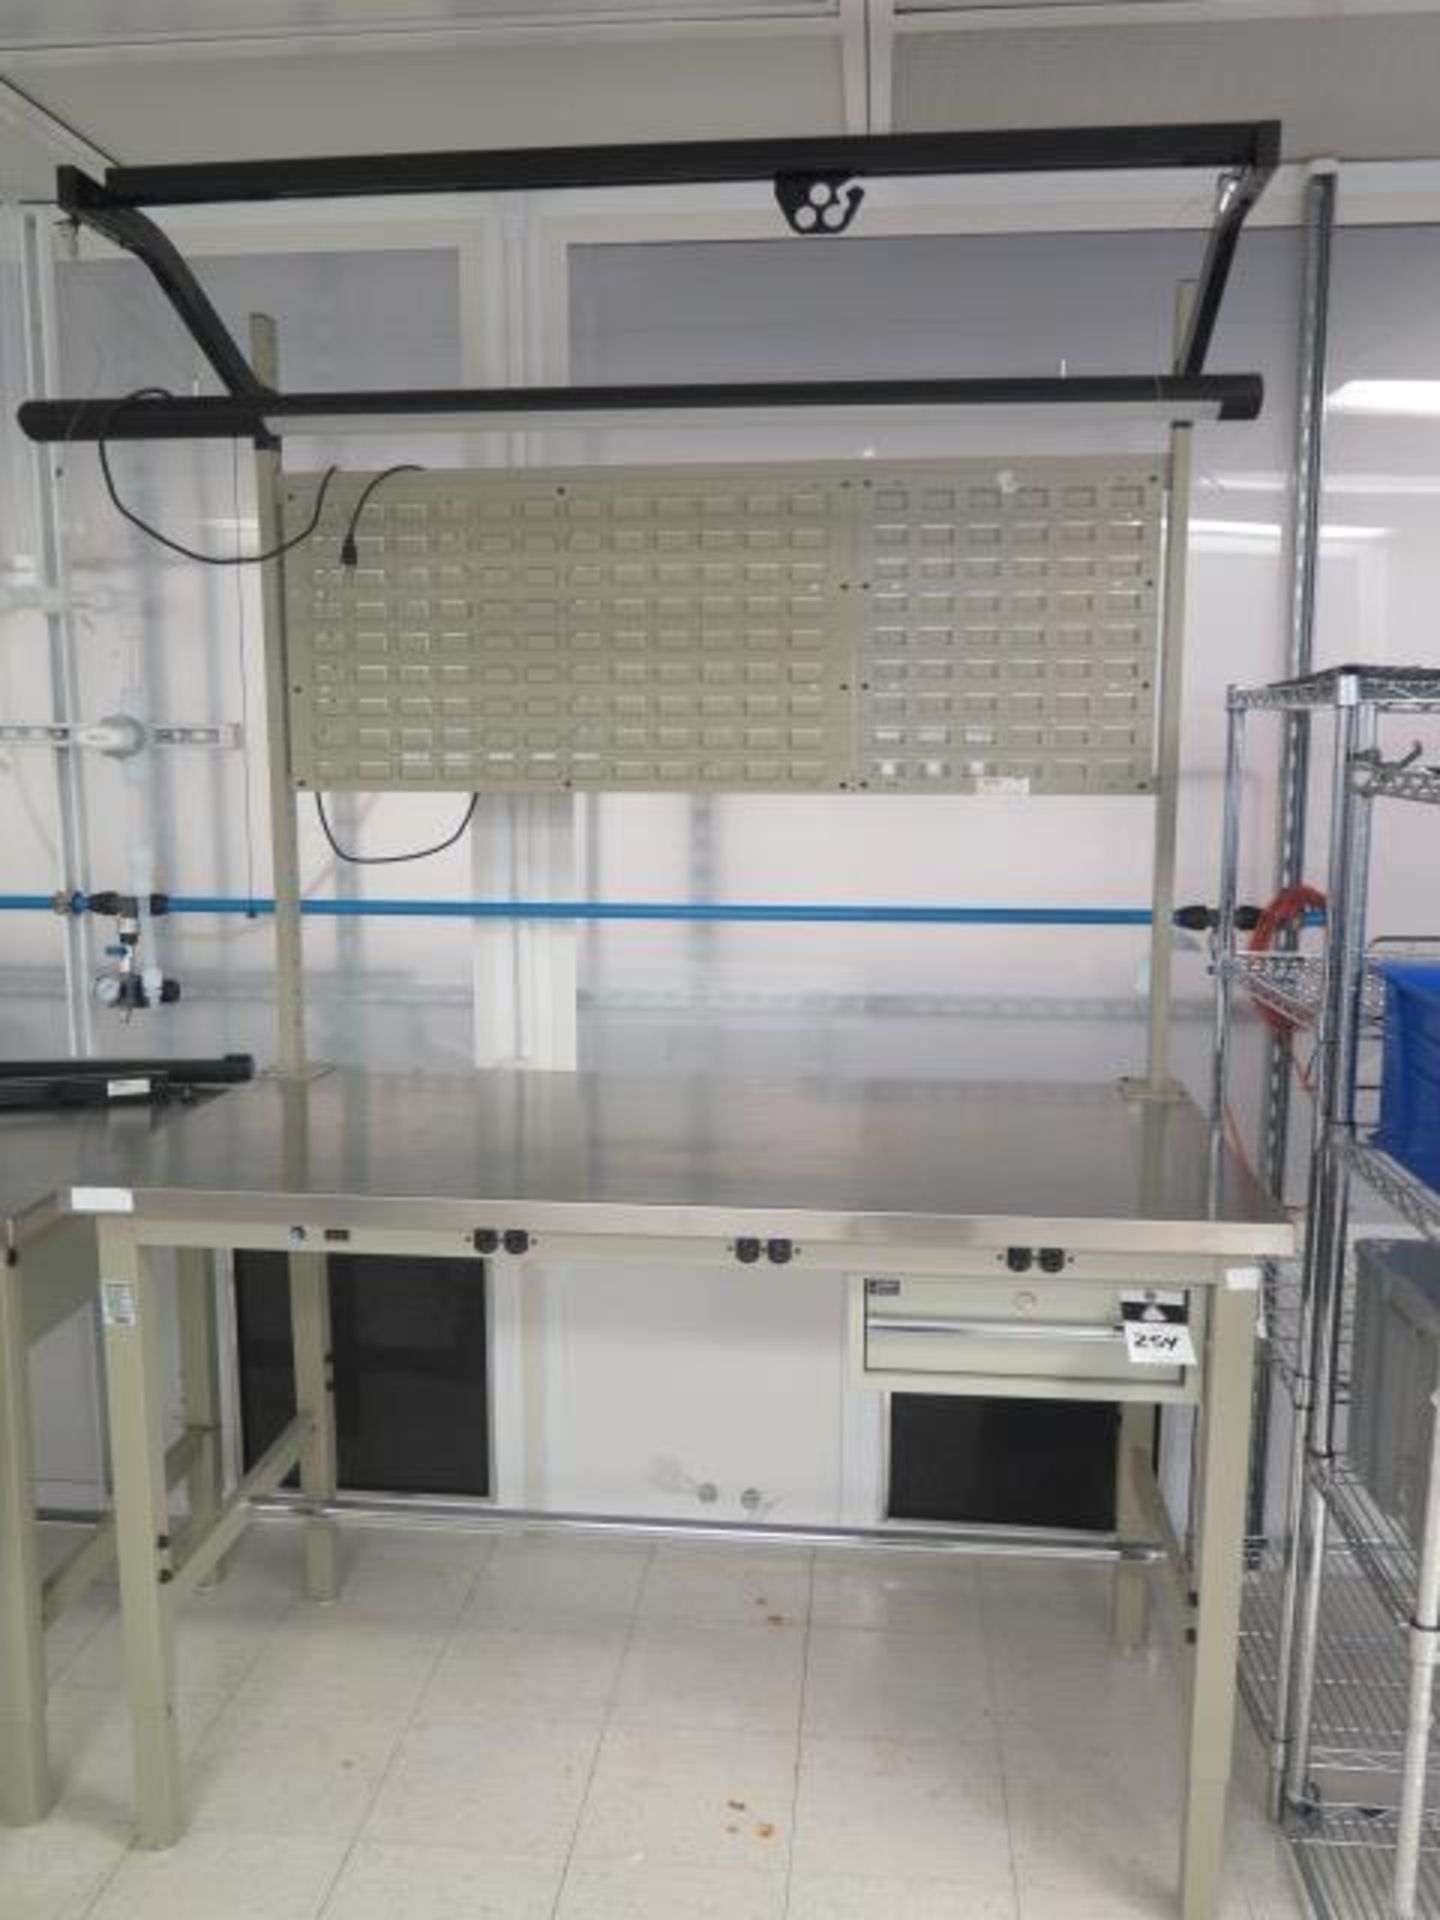 Global 30" x 60" Stainless Top Lab Benches (2) w/ Back-Boards and Lights (SOLD AS-IS - NO WARRANTY) - Image 2 of 11